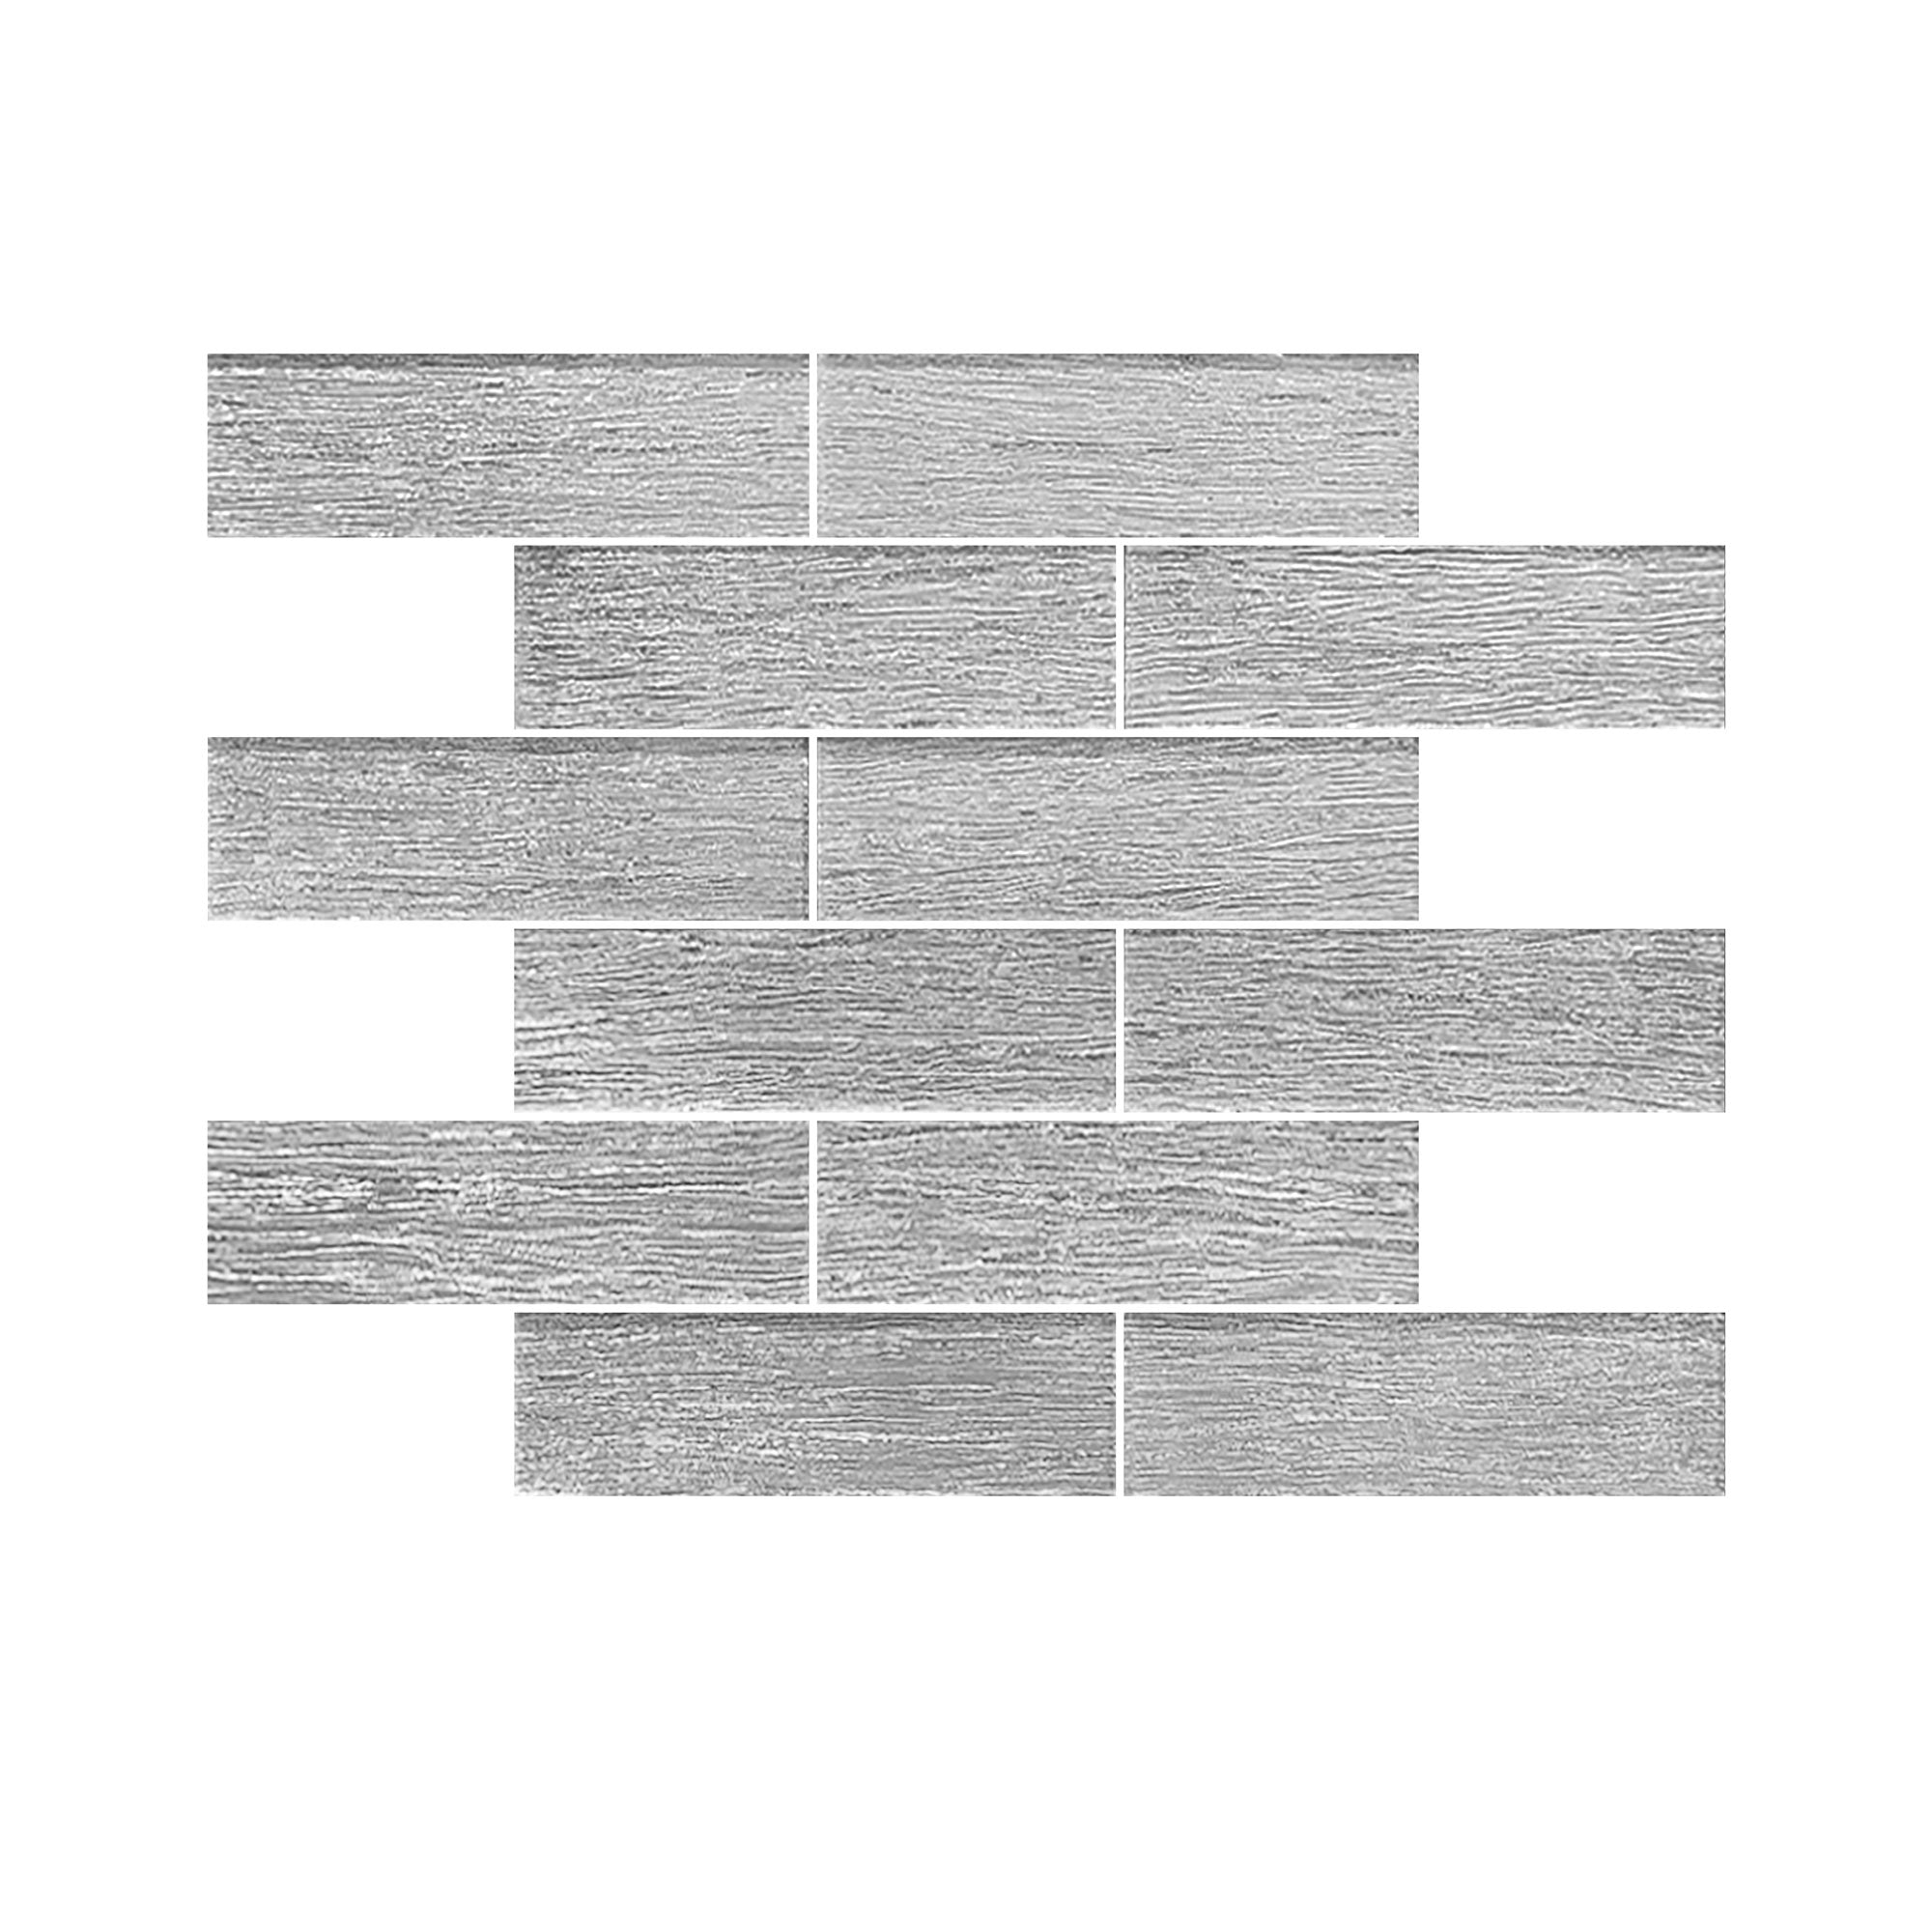 12 x 12 inch Glass Mosaic Tile with Shiny Silver Color and Glossy Finish